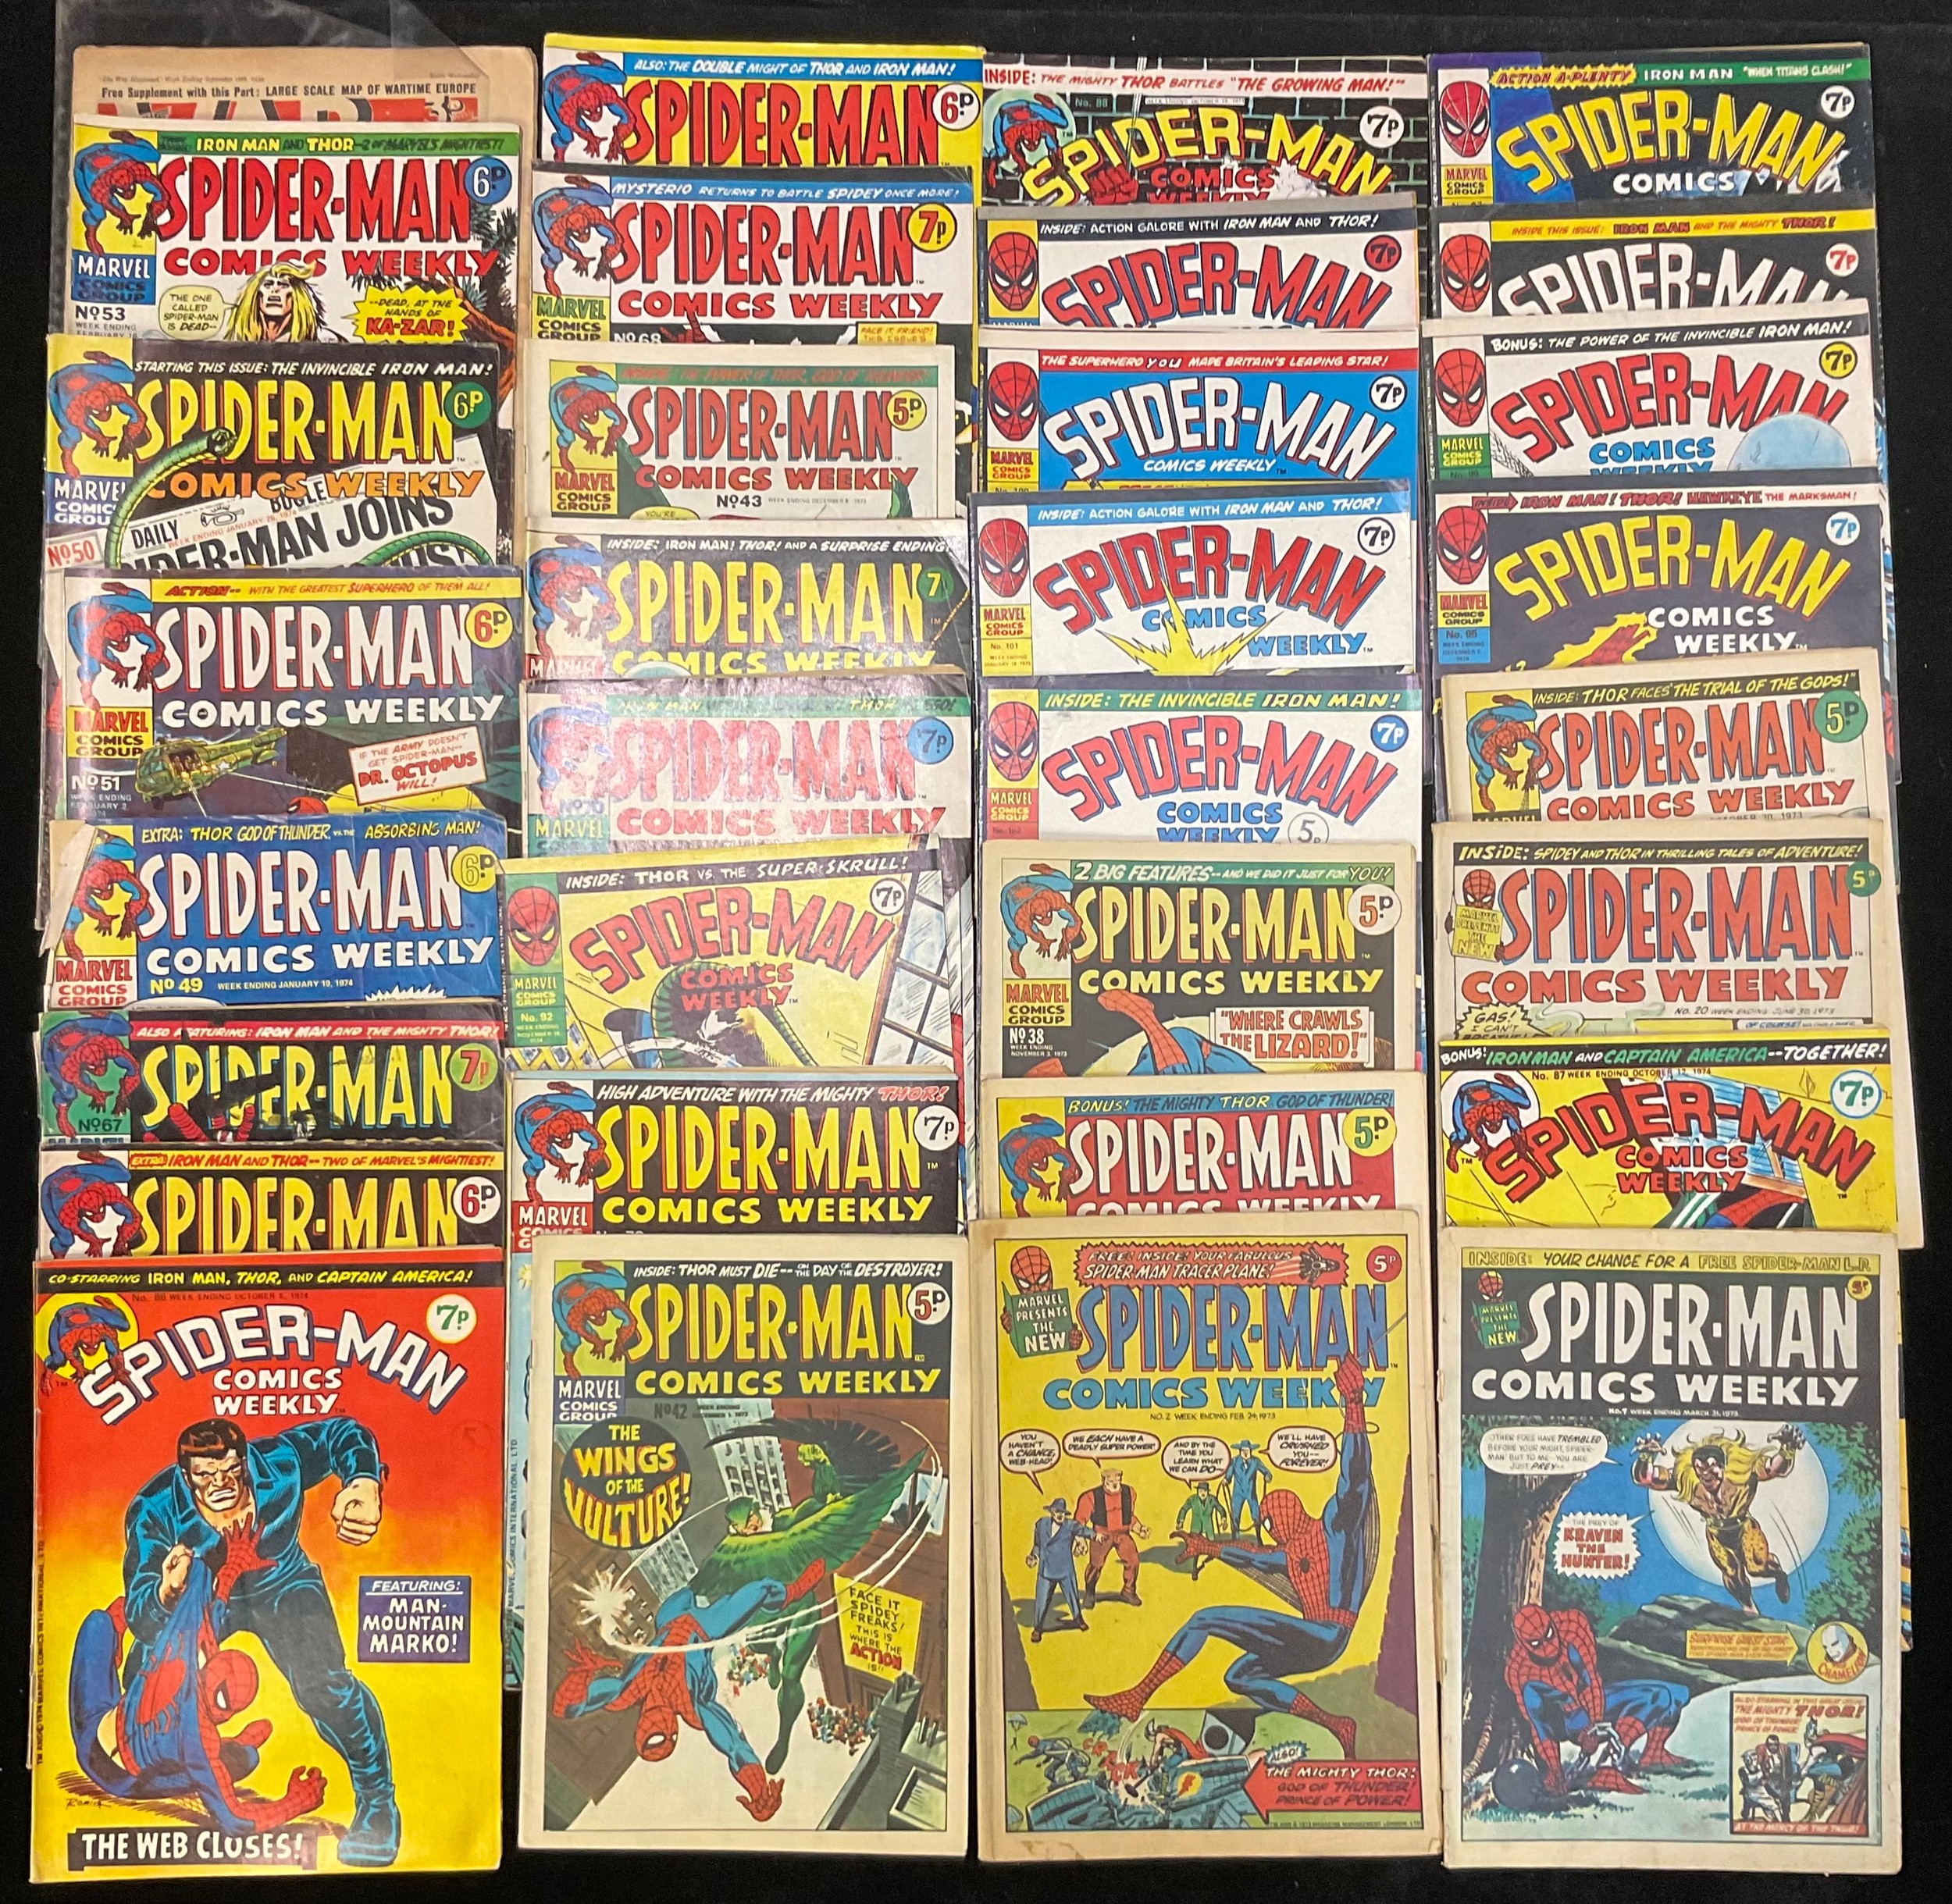 32 Spider-Man comics weekly from 1970s, including #2 (1973). Approx condition VG-FN. Bronze Age